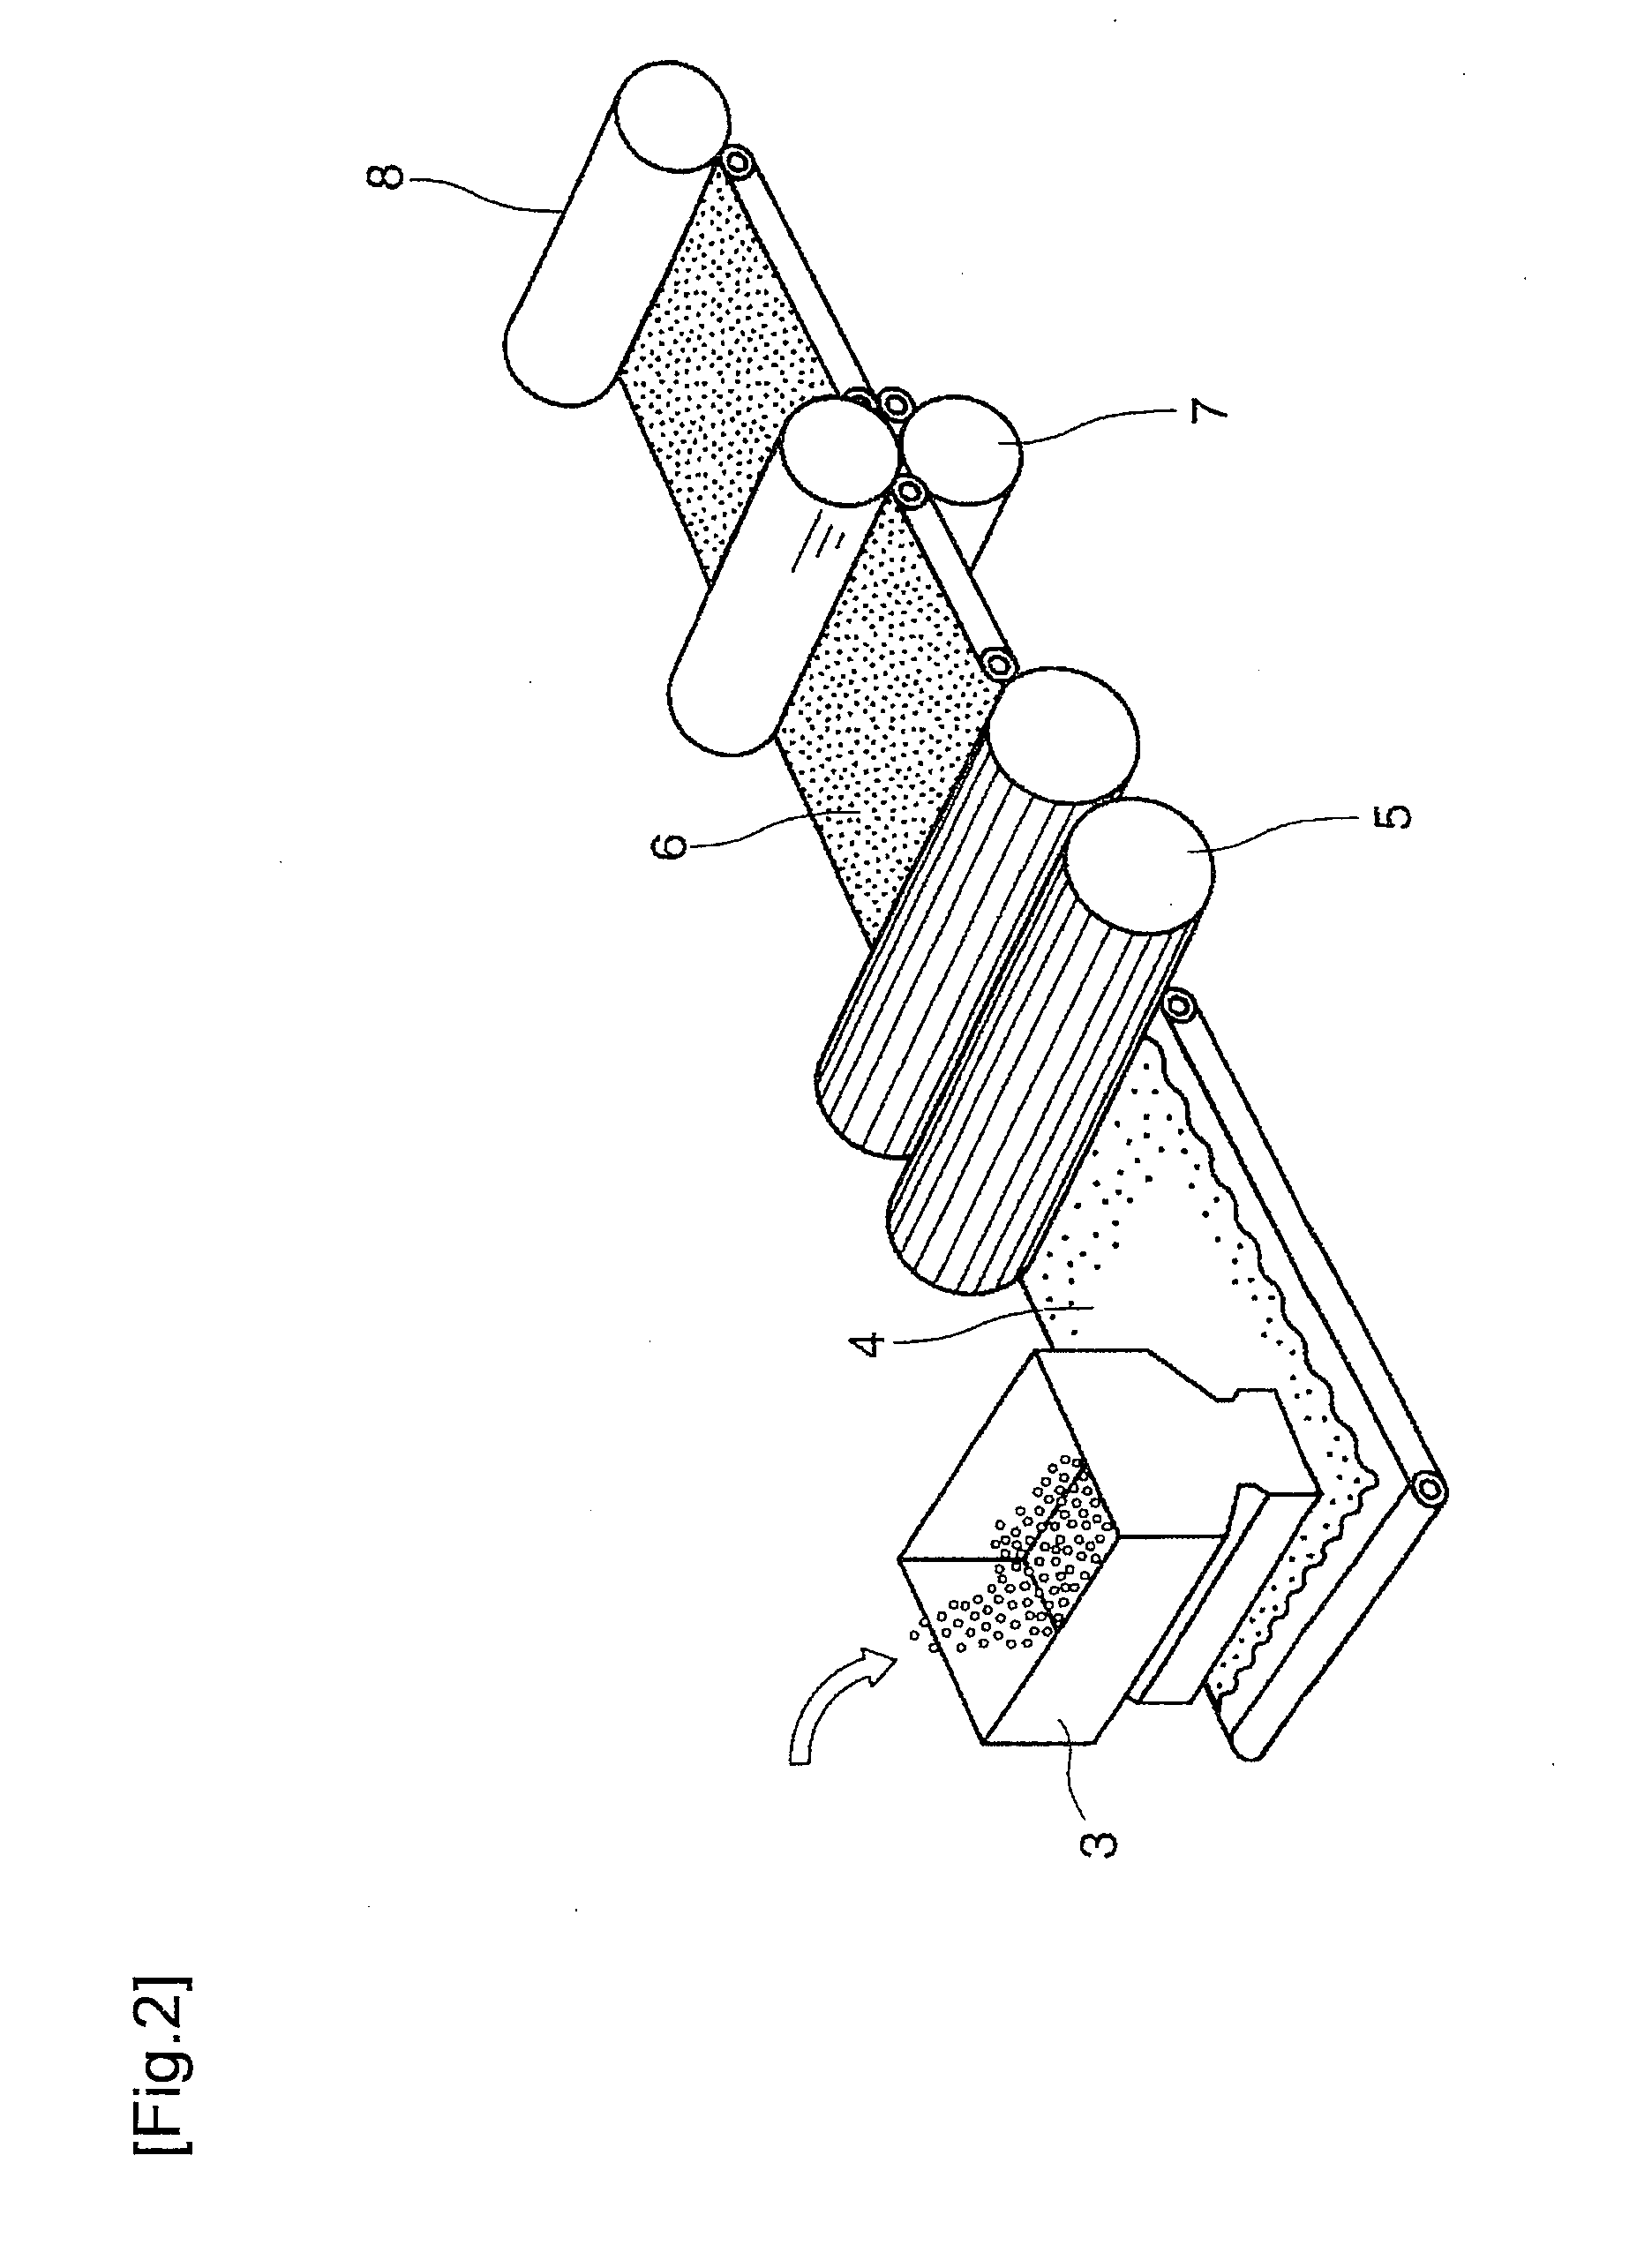 Air Filter And Air Filter Assembly For Vacuum Cleaner With The Air Filter